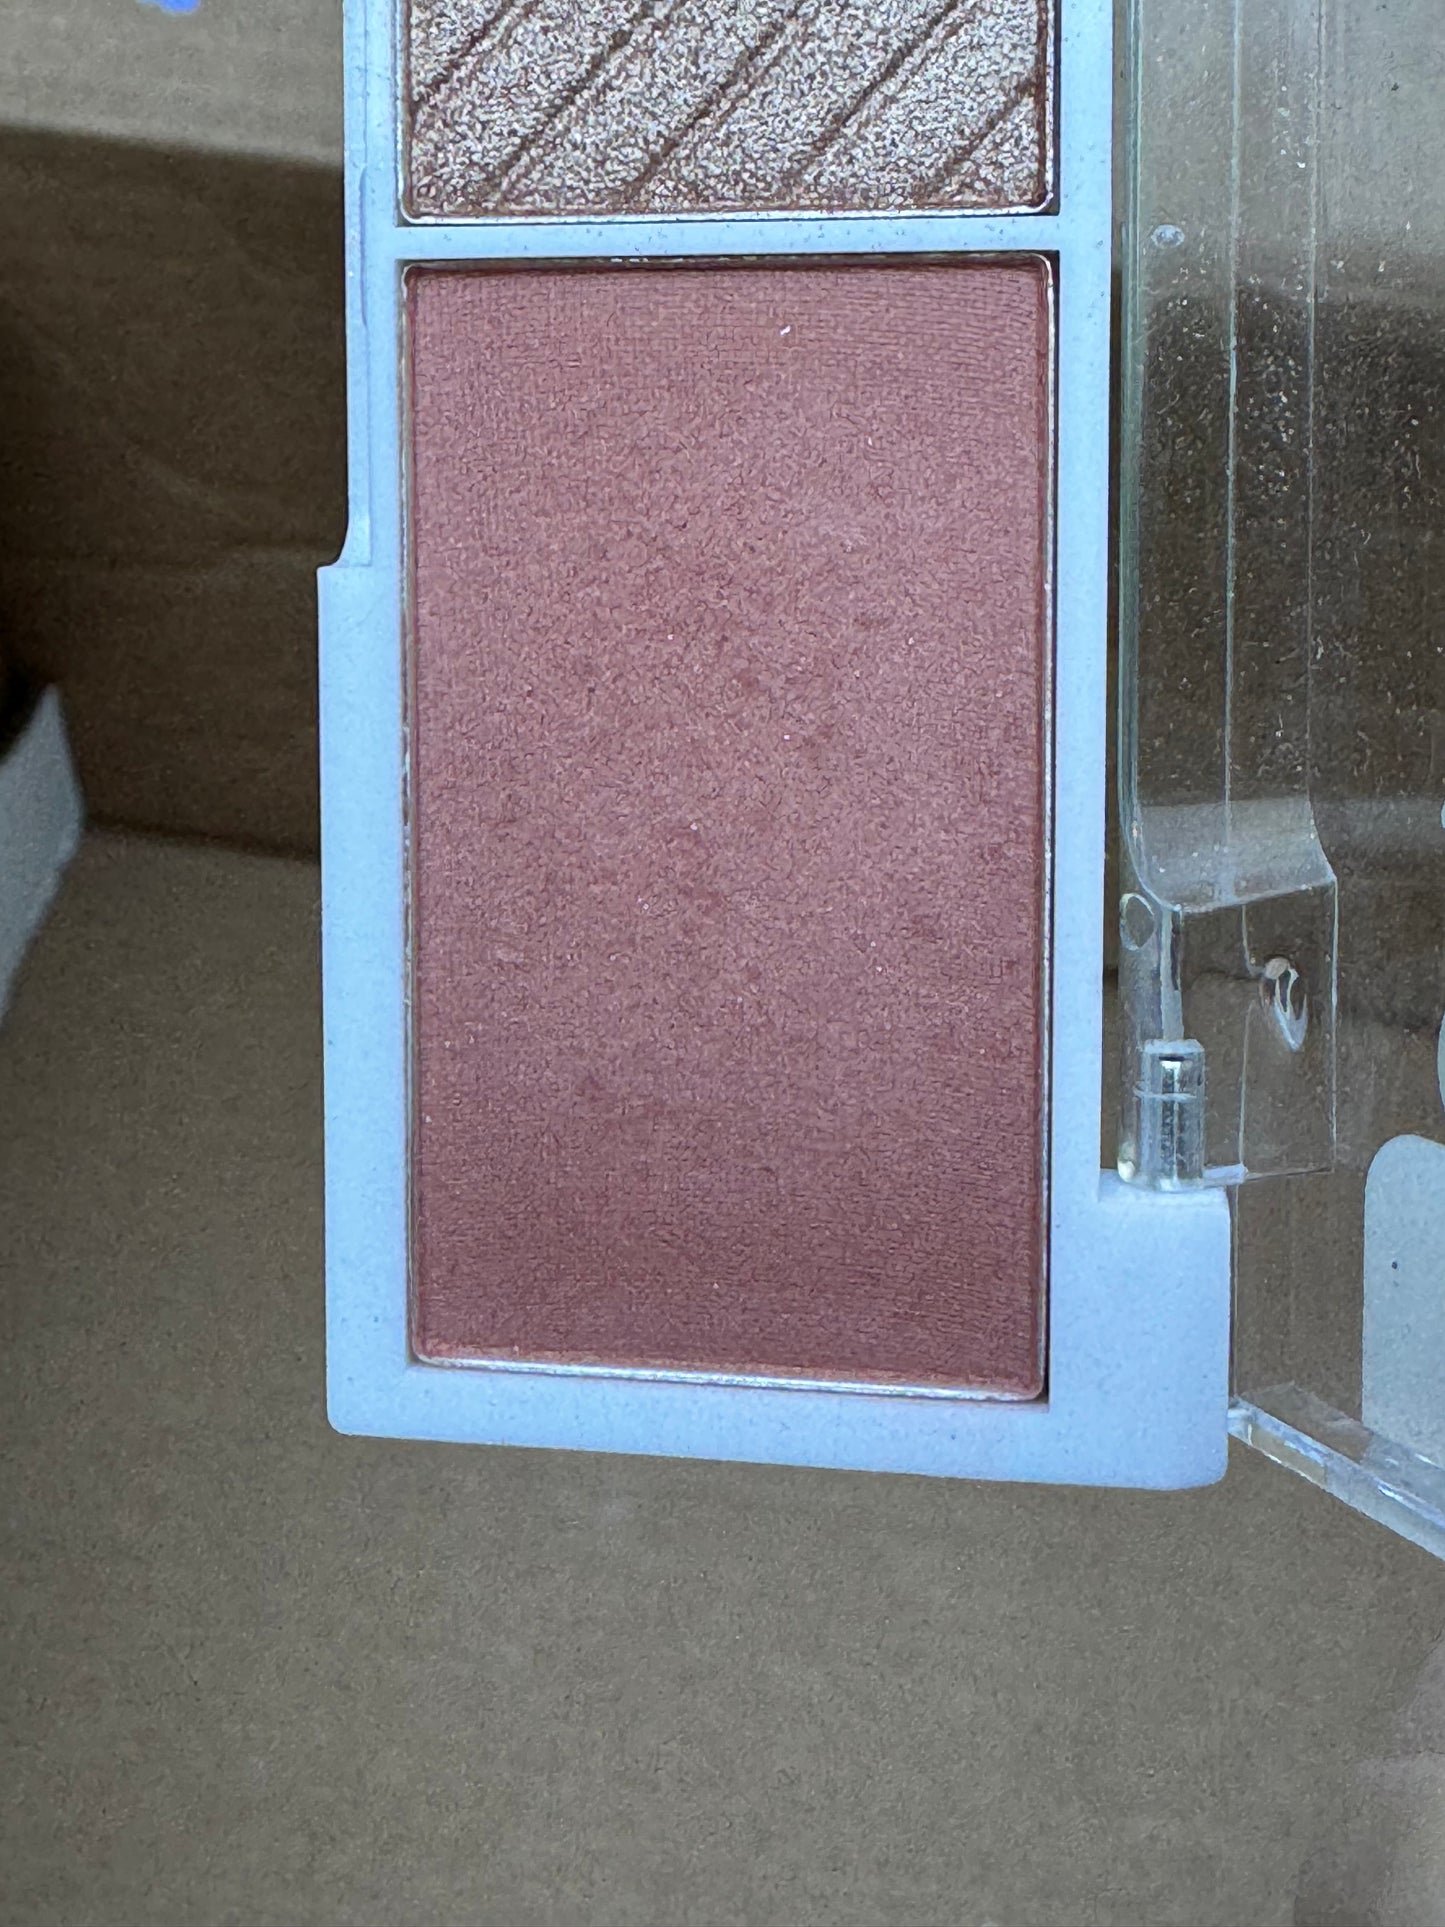 Elf Cosmetics Bite-Size Face Duo in Lychee